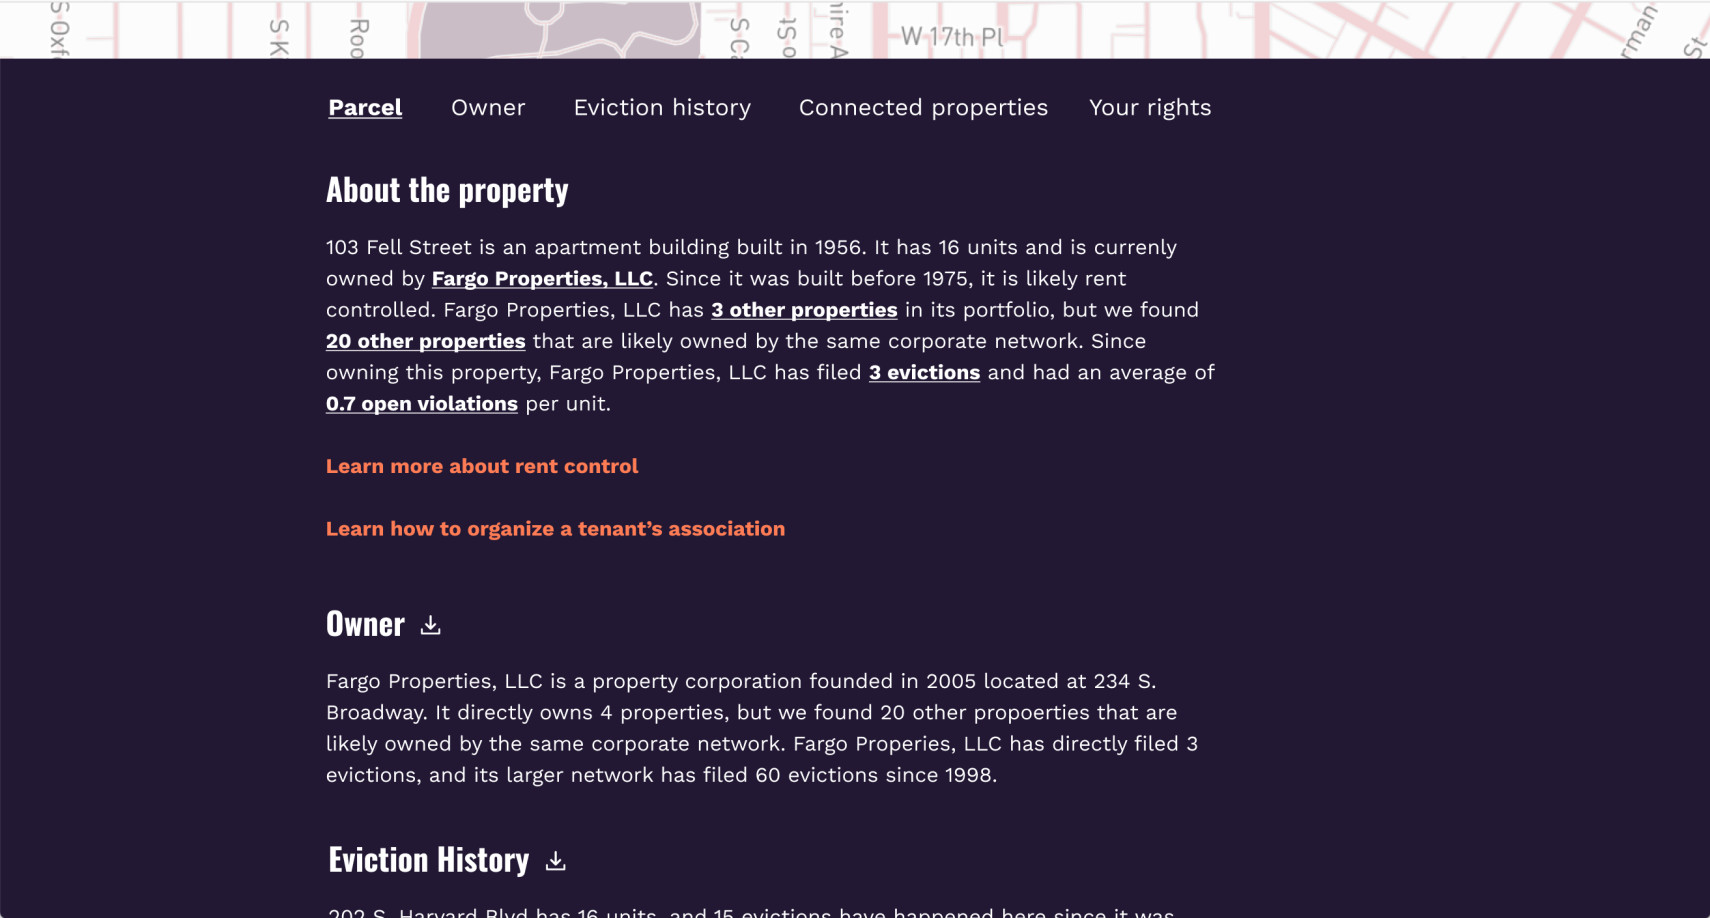 A screenshot from Evictorbook showing details about the selected property, including owner, eviction history, and links to information about rent control and organizing a tenant's association.